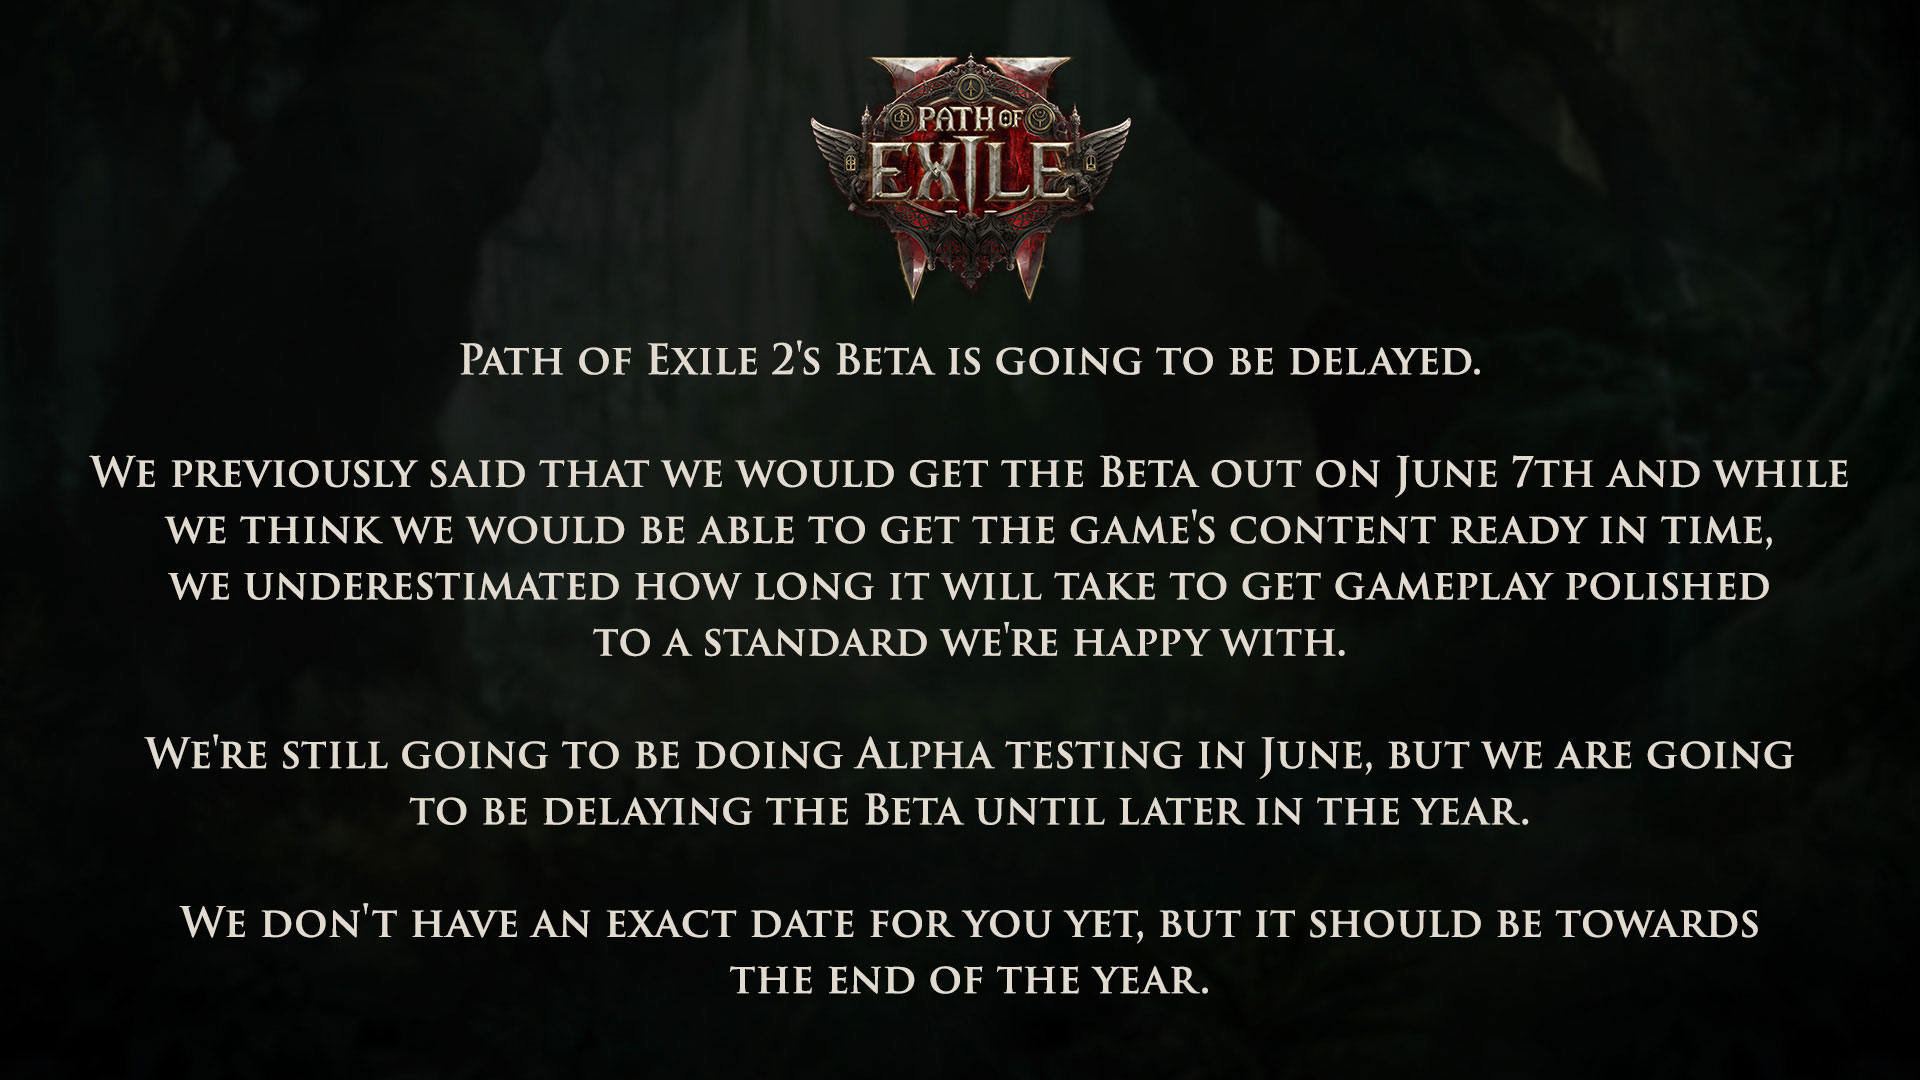 Path of Exile 2's beta has been delayed, but alpha testing will take place in June